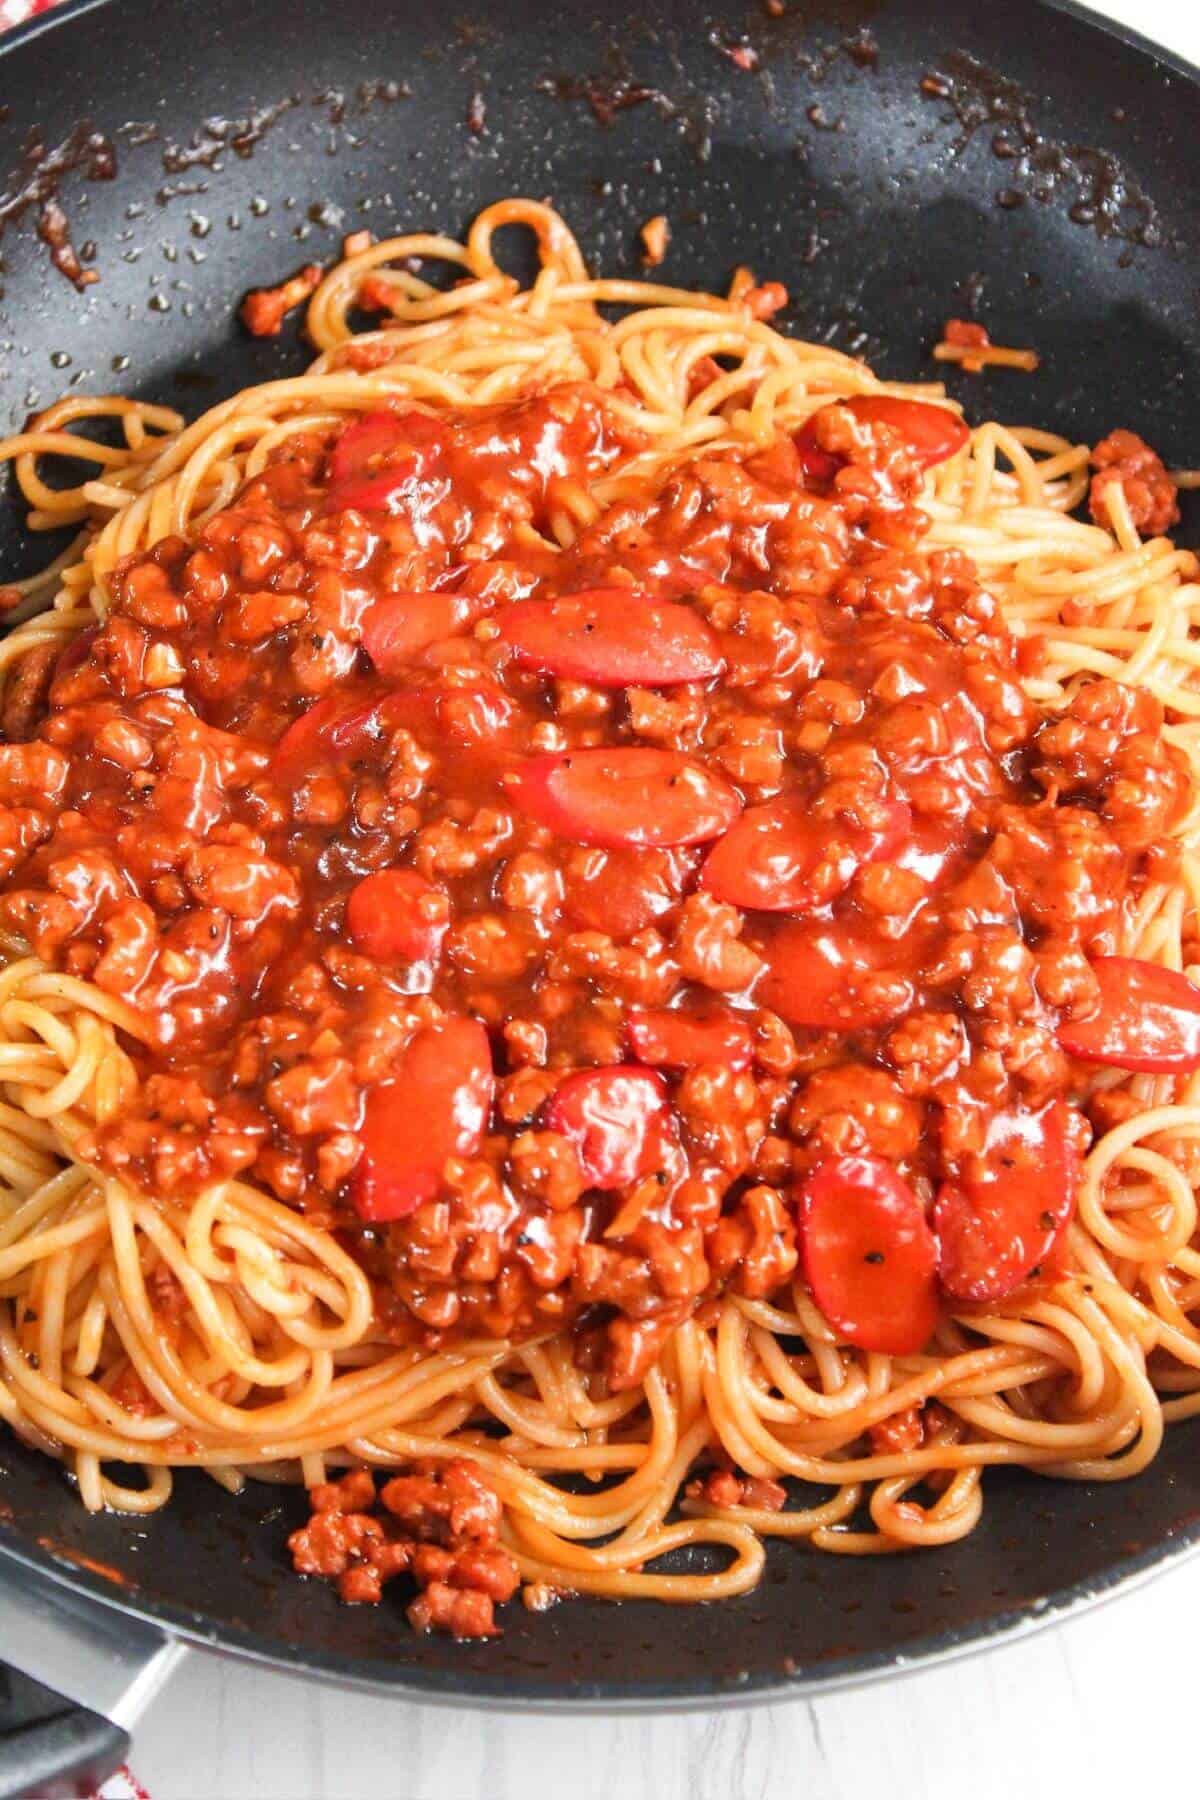 Spaghetti and meat sauce in a frying pan.